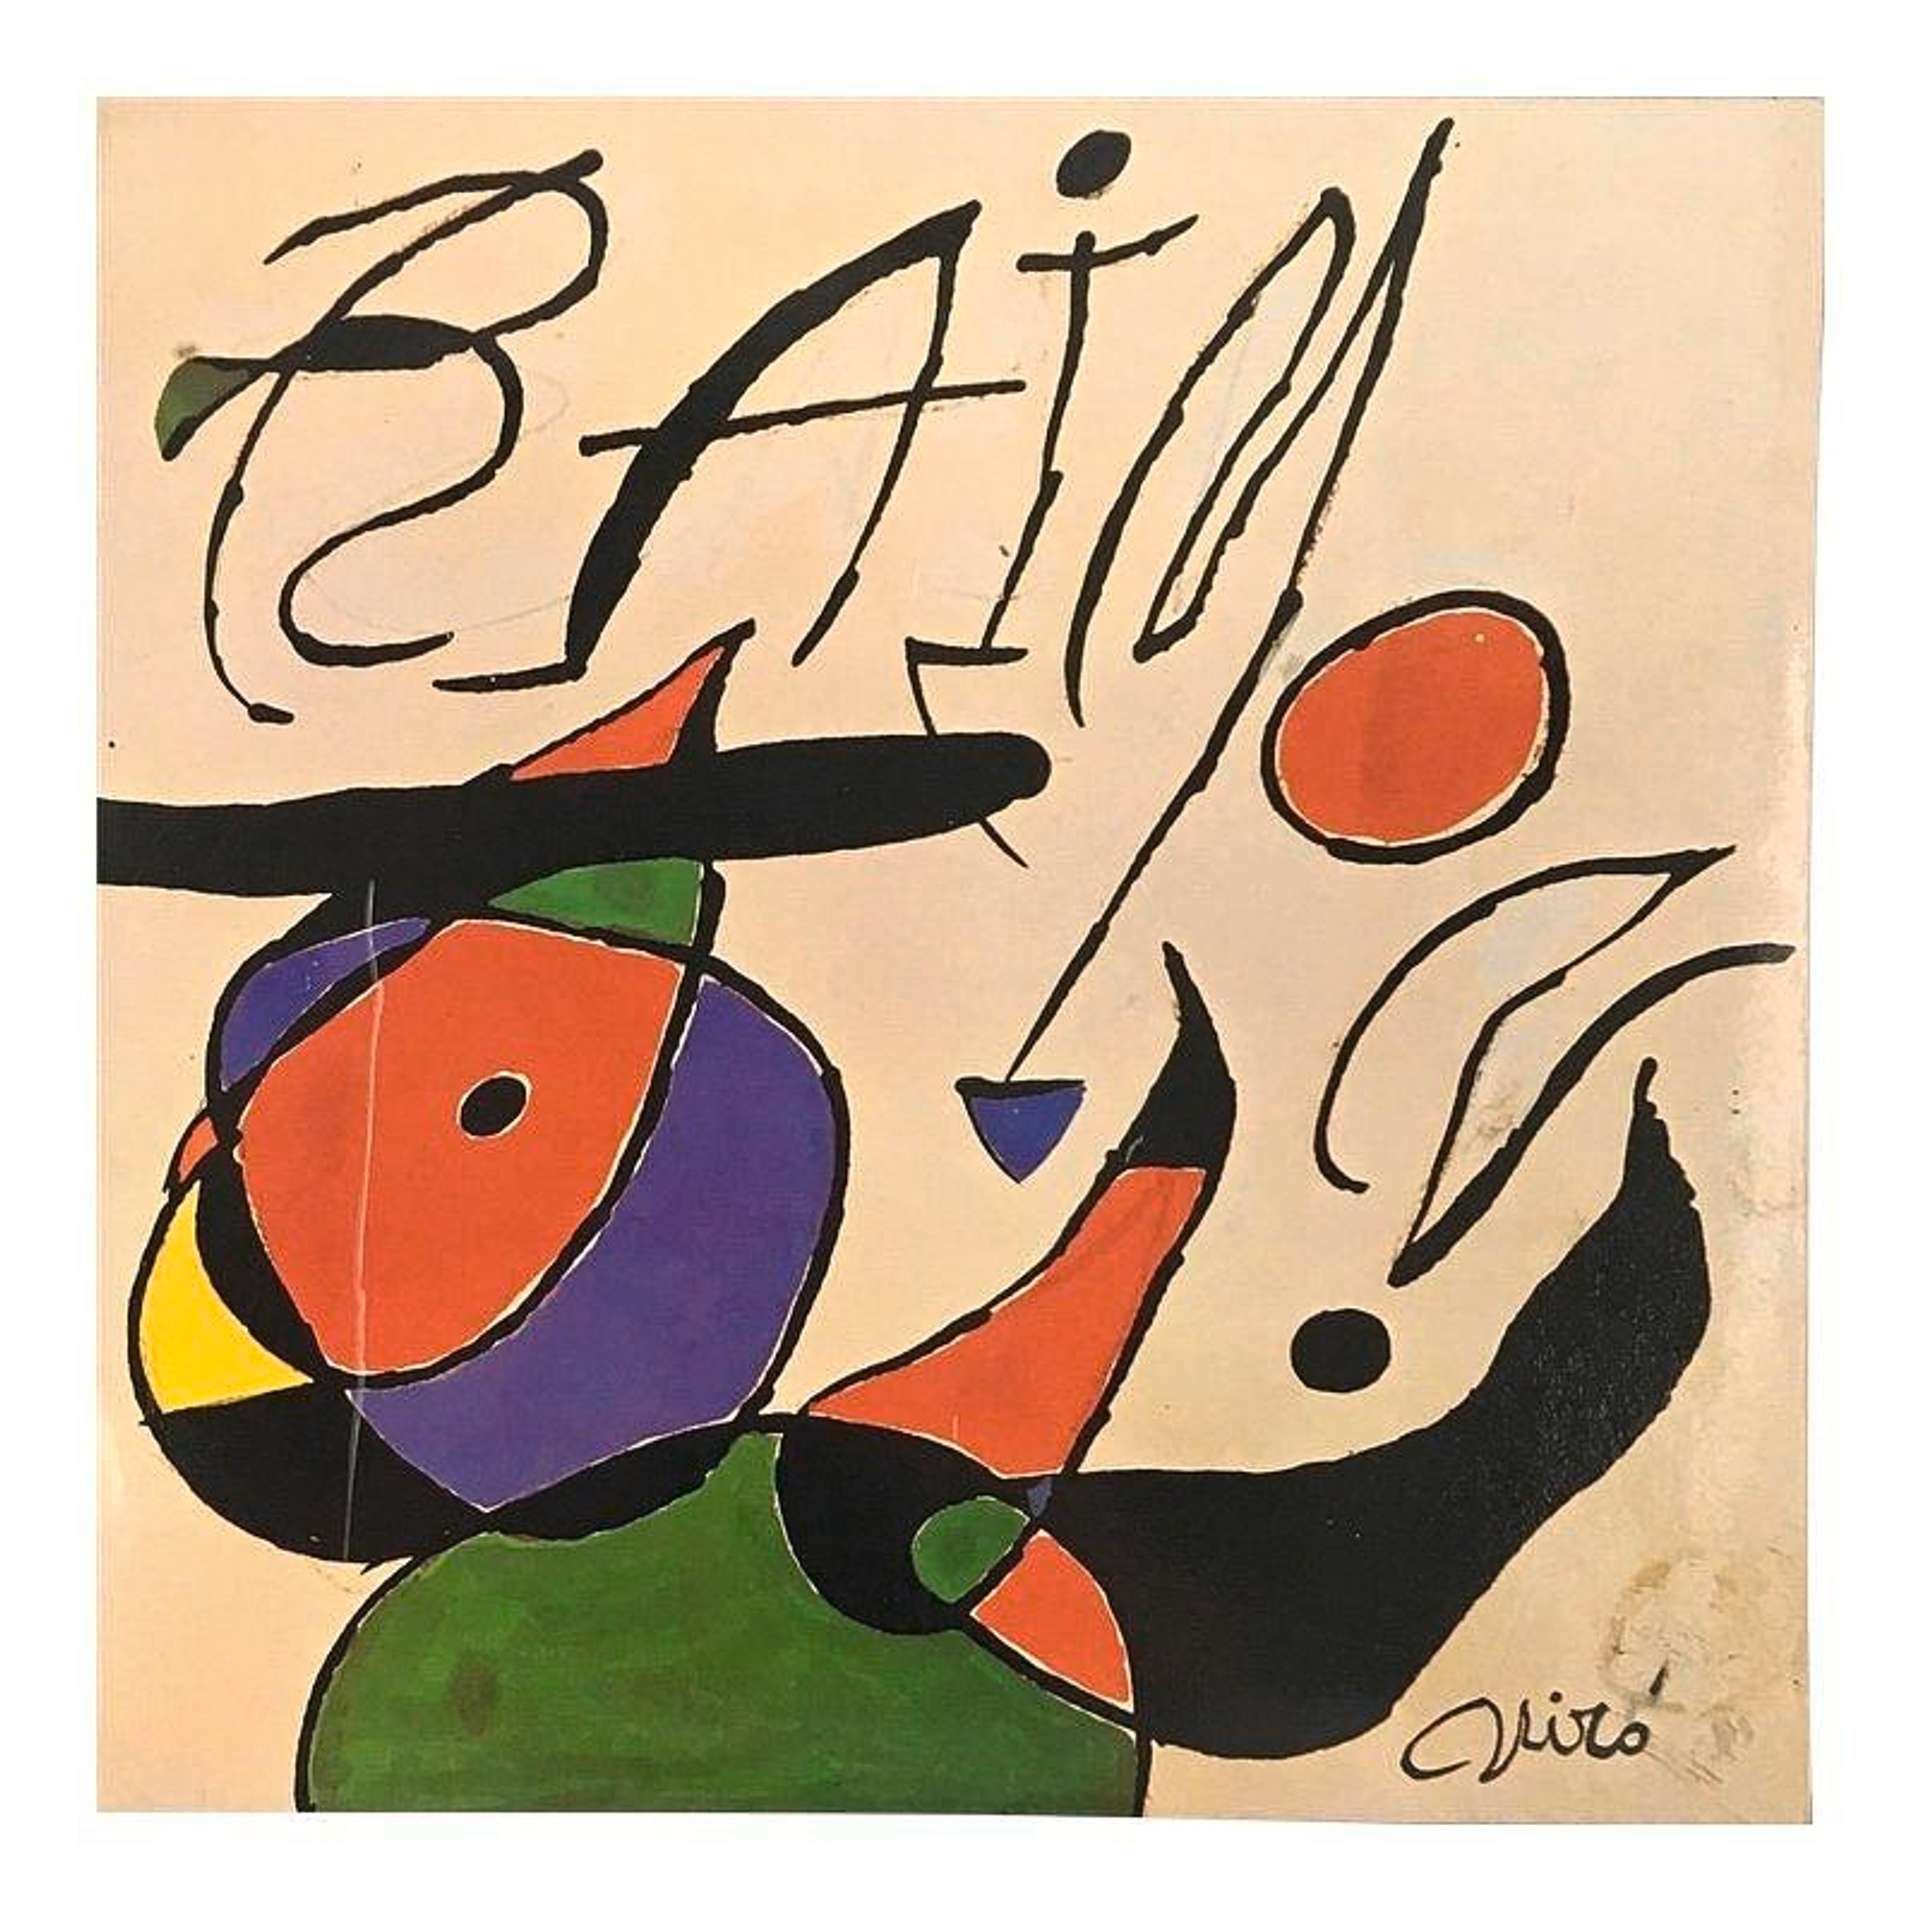 An image of the album cover for Quan L’aigua Es Queixa, designed by artist Joan Miró. It is an abstract figure, depicted in primary colours, alongside a stylised depiction of the musician Raimon’s name.